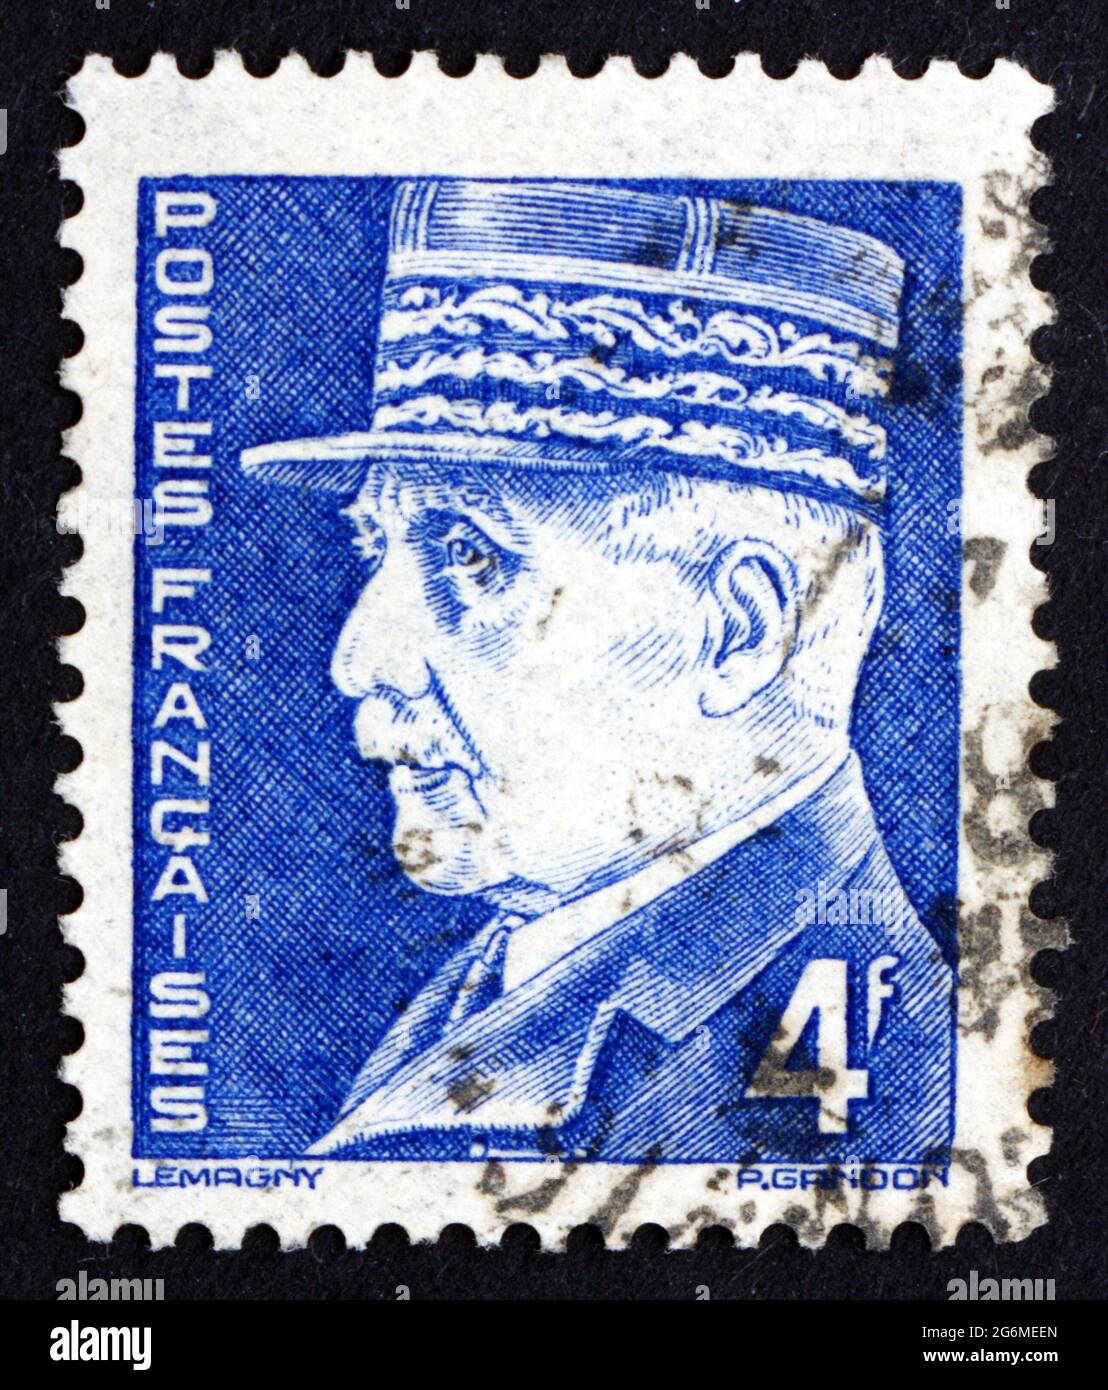 FRANCE - CIRCA 1942: a stamp printed in the France shows Portrait of Marshal Petain, Philippe Petain, Hero of World War I, Chief of State of Vichy Fra Stock Photo